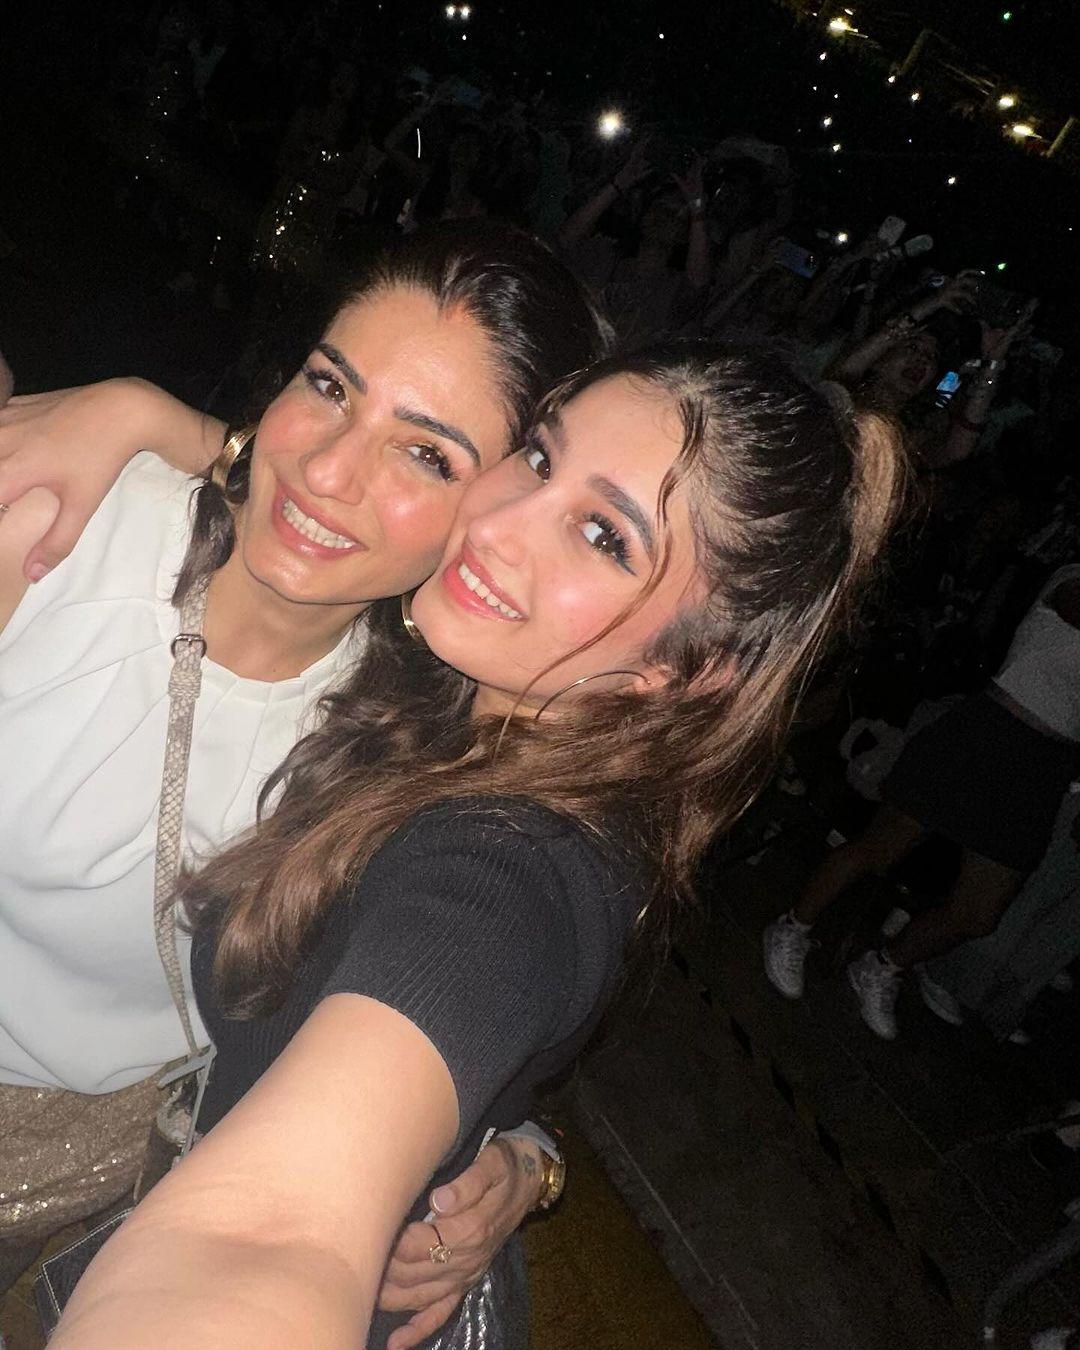 Raveena and Rasha Thadani have an incredibly close bond. Raveena, being a protective mother, kept Rasha shielded from the limelight, wanting her to have a normal childhood away from paparazzi